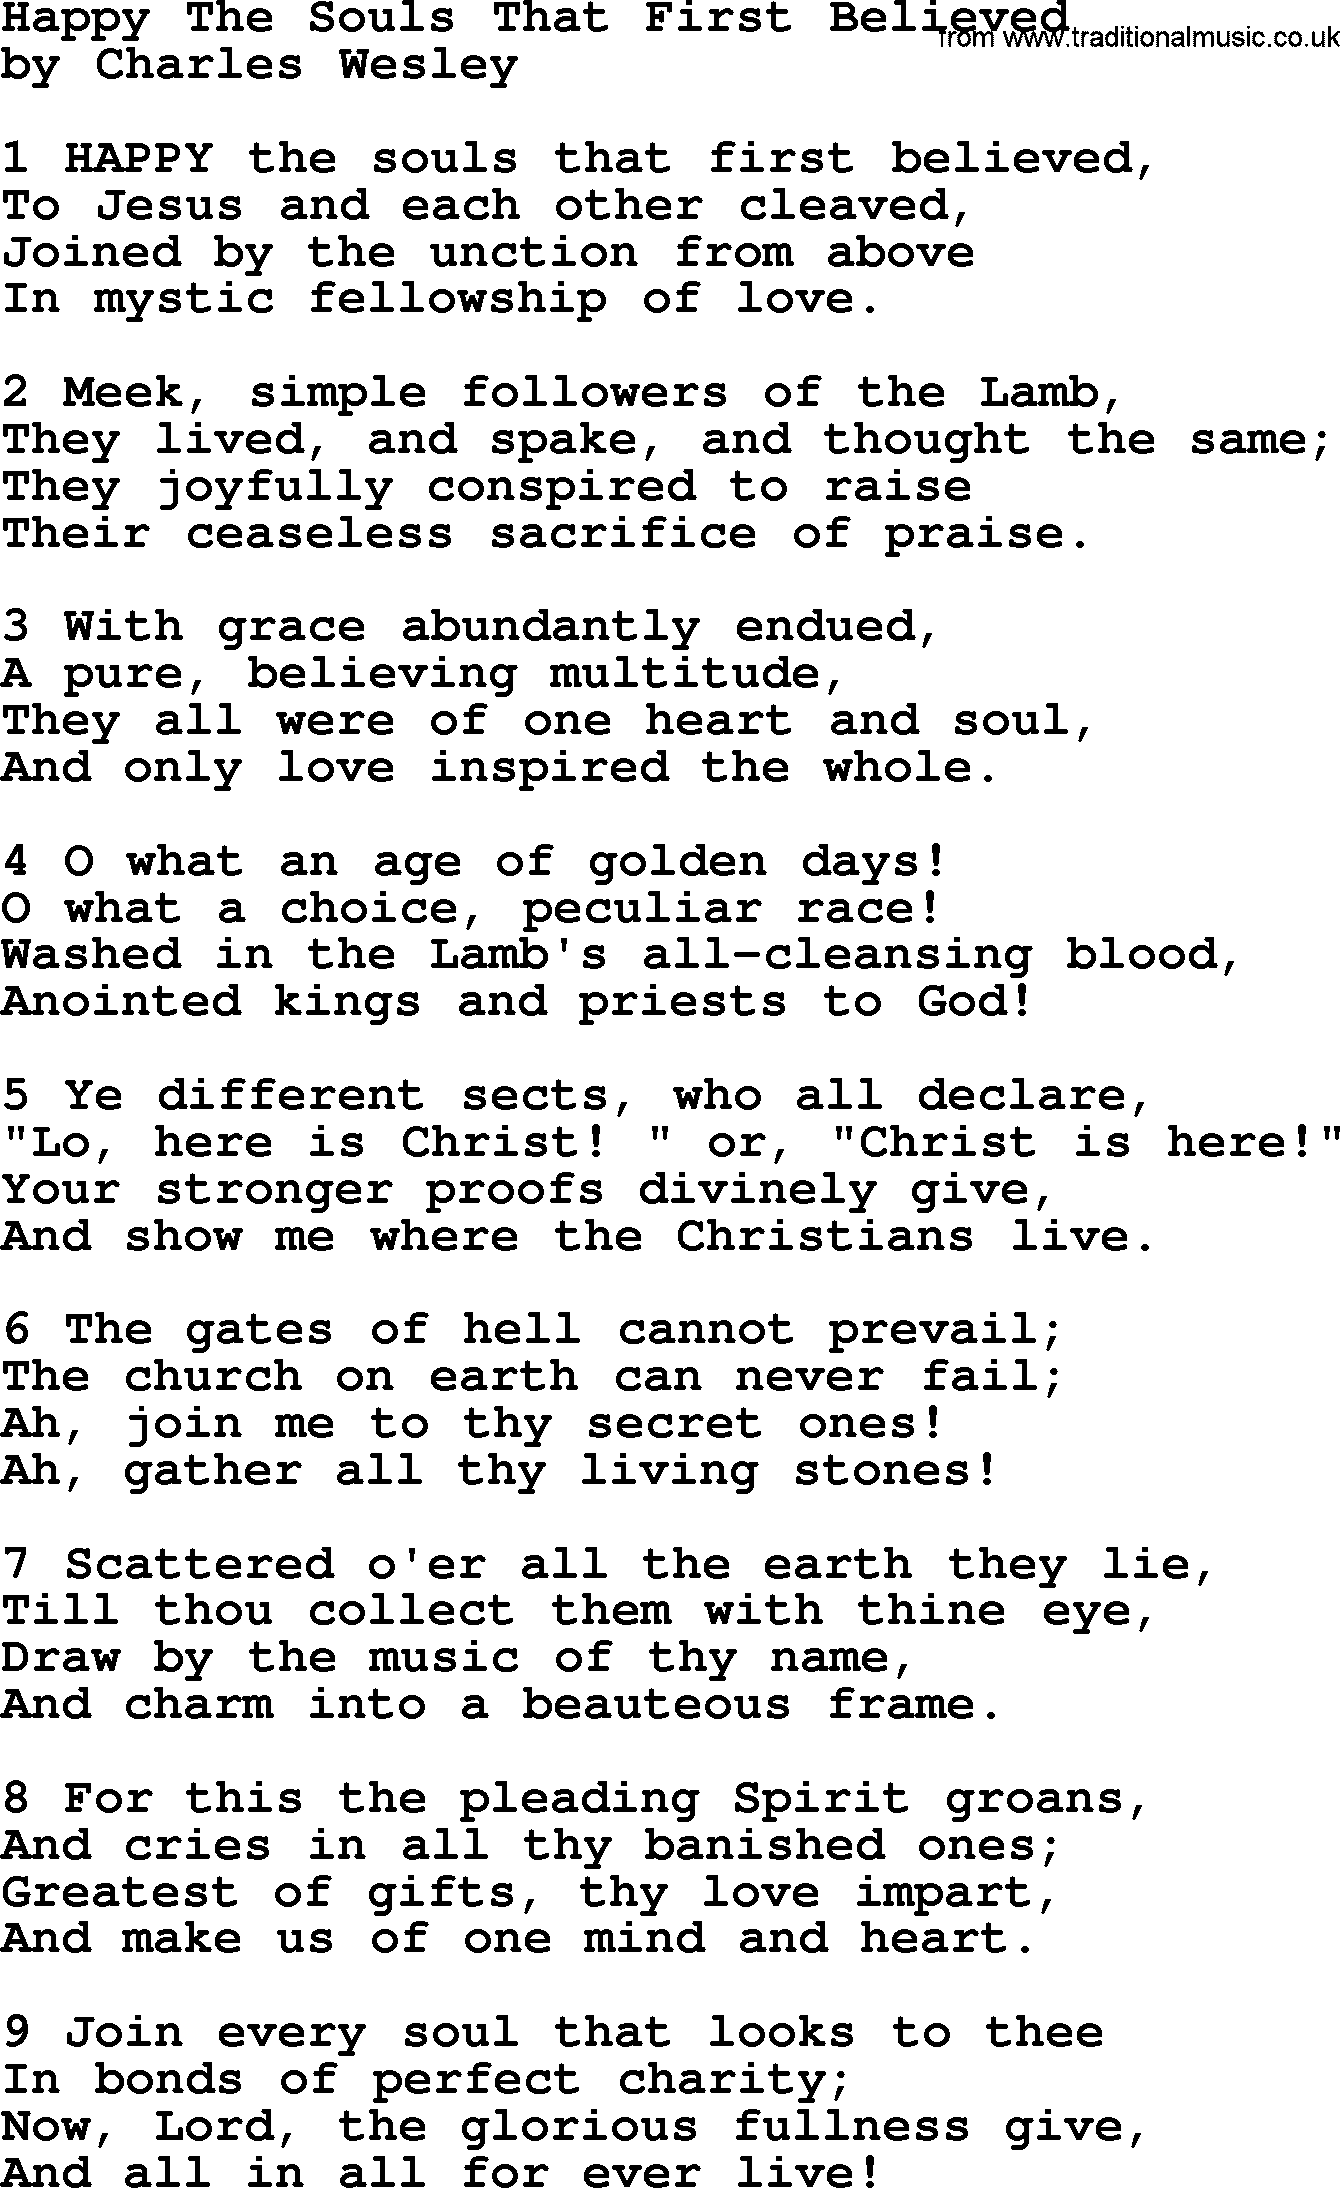 Charles Wesley hymn: Happy The Souls That First Believed, lyrics